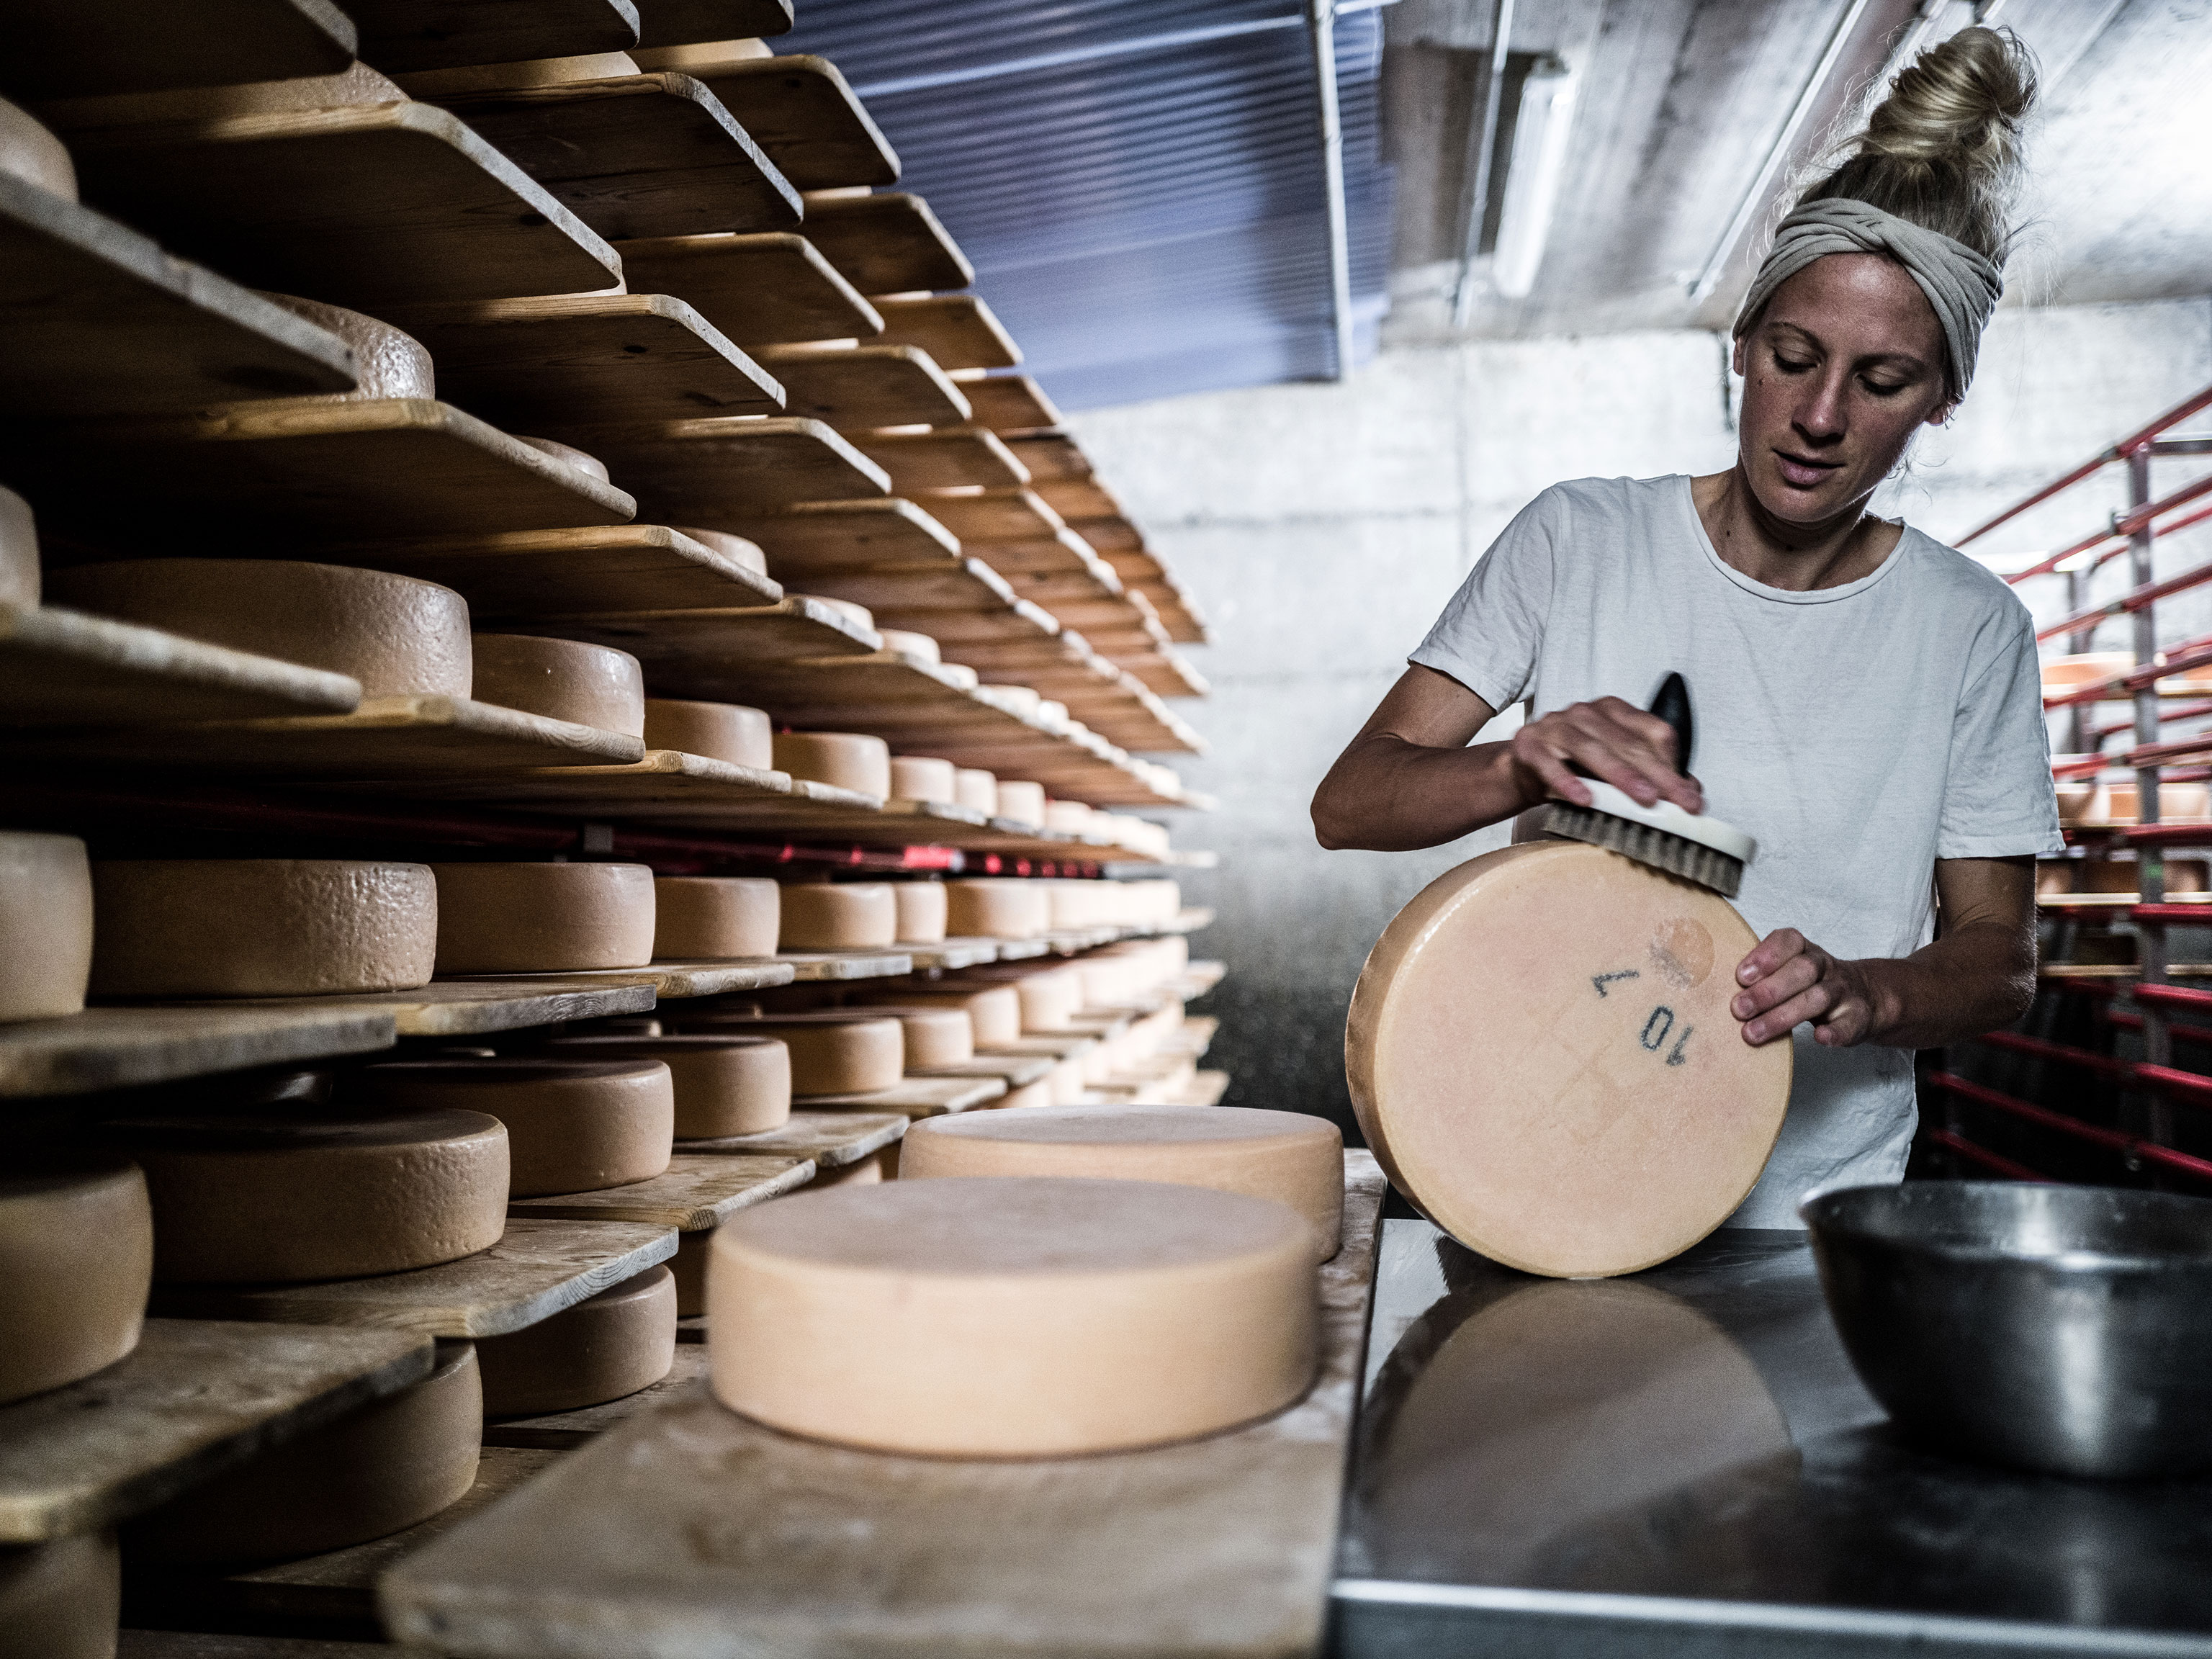 Katharina uses a large brush to brush a cheese wheel rind